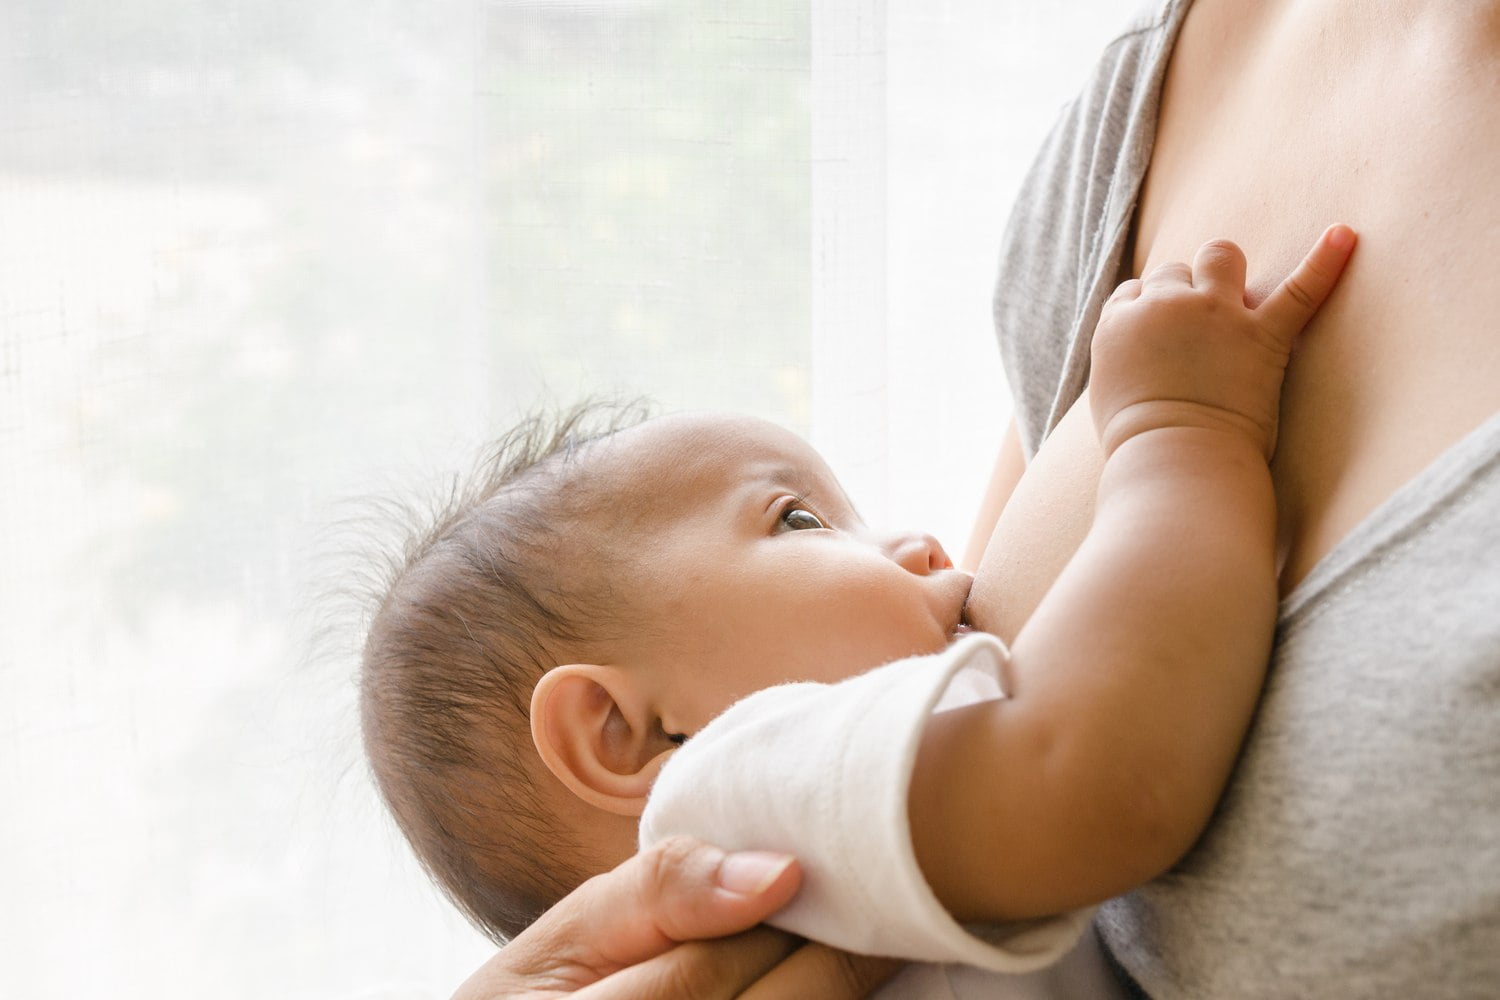 Breastfeeding Techniques You May Consider